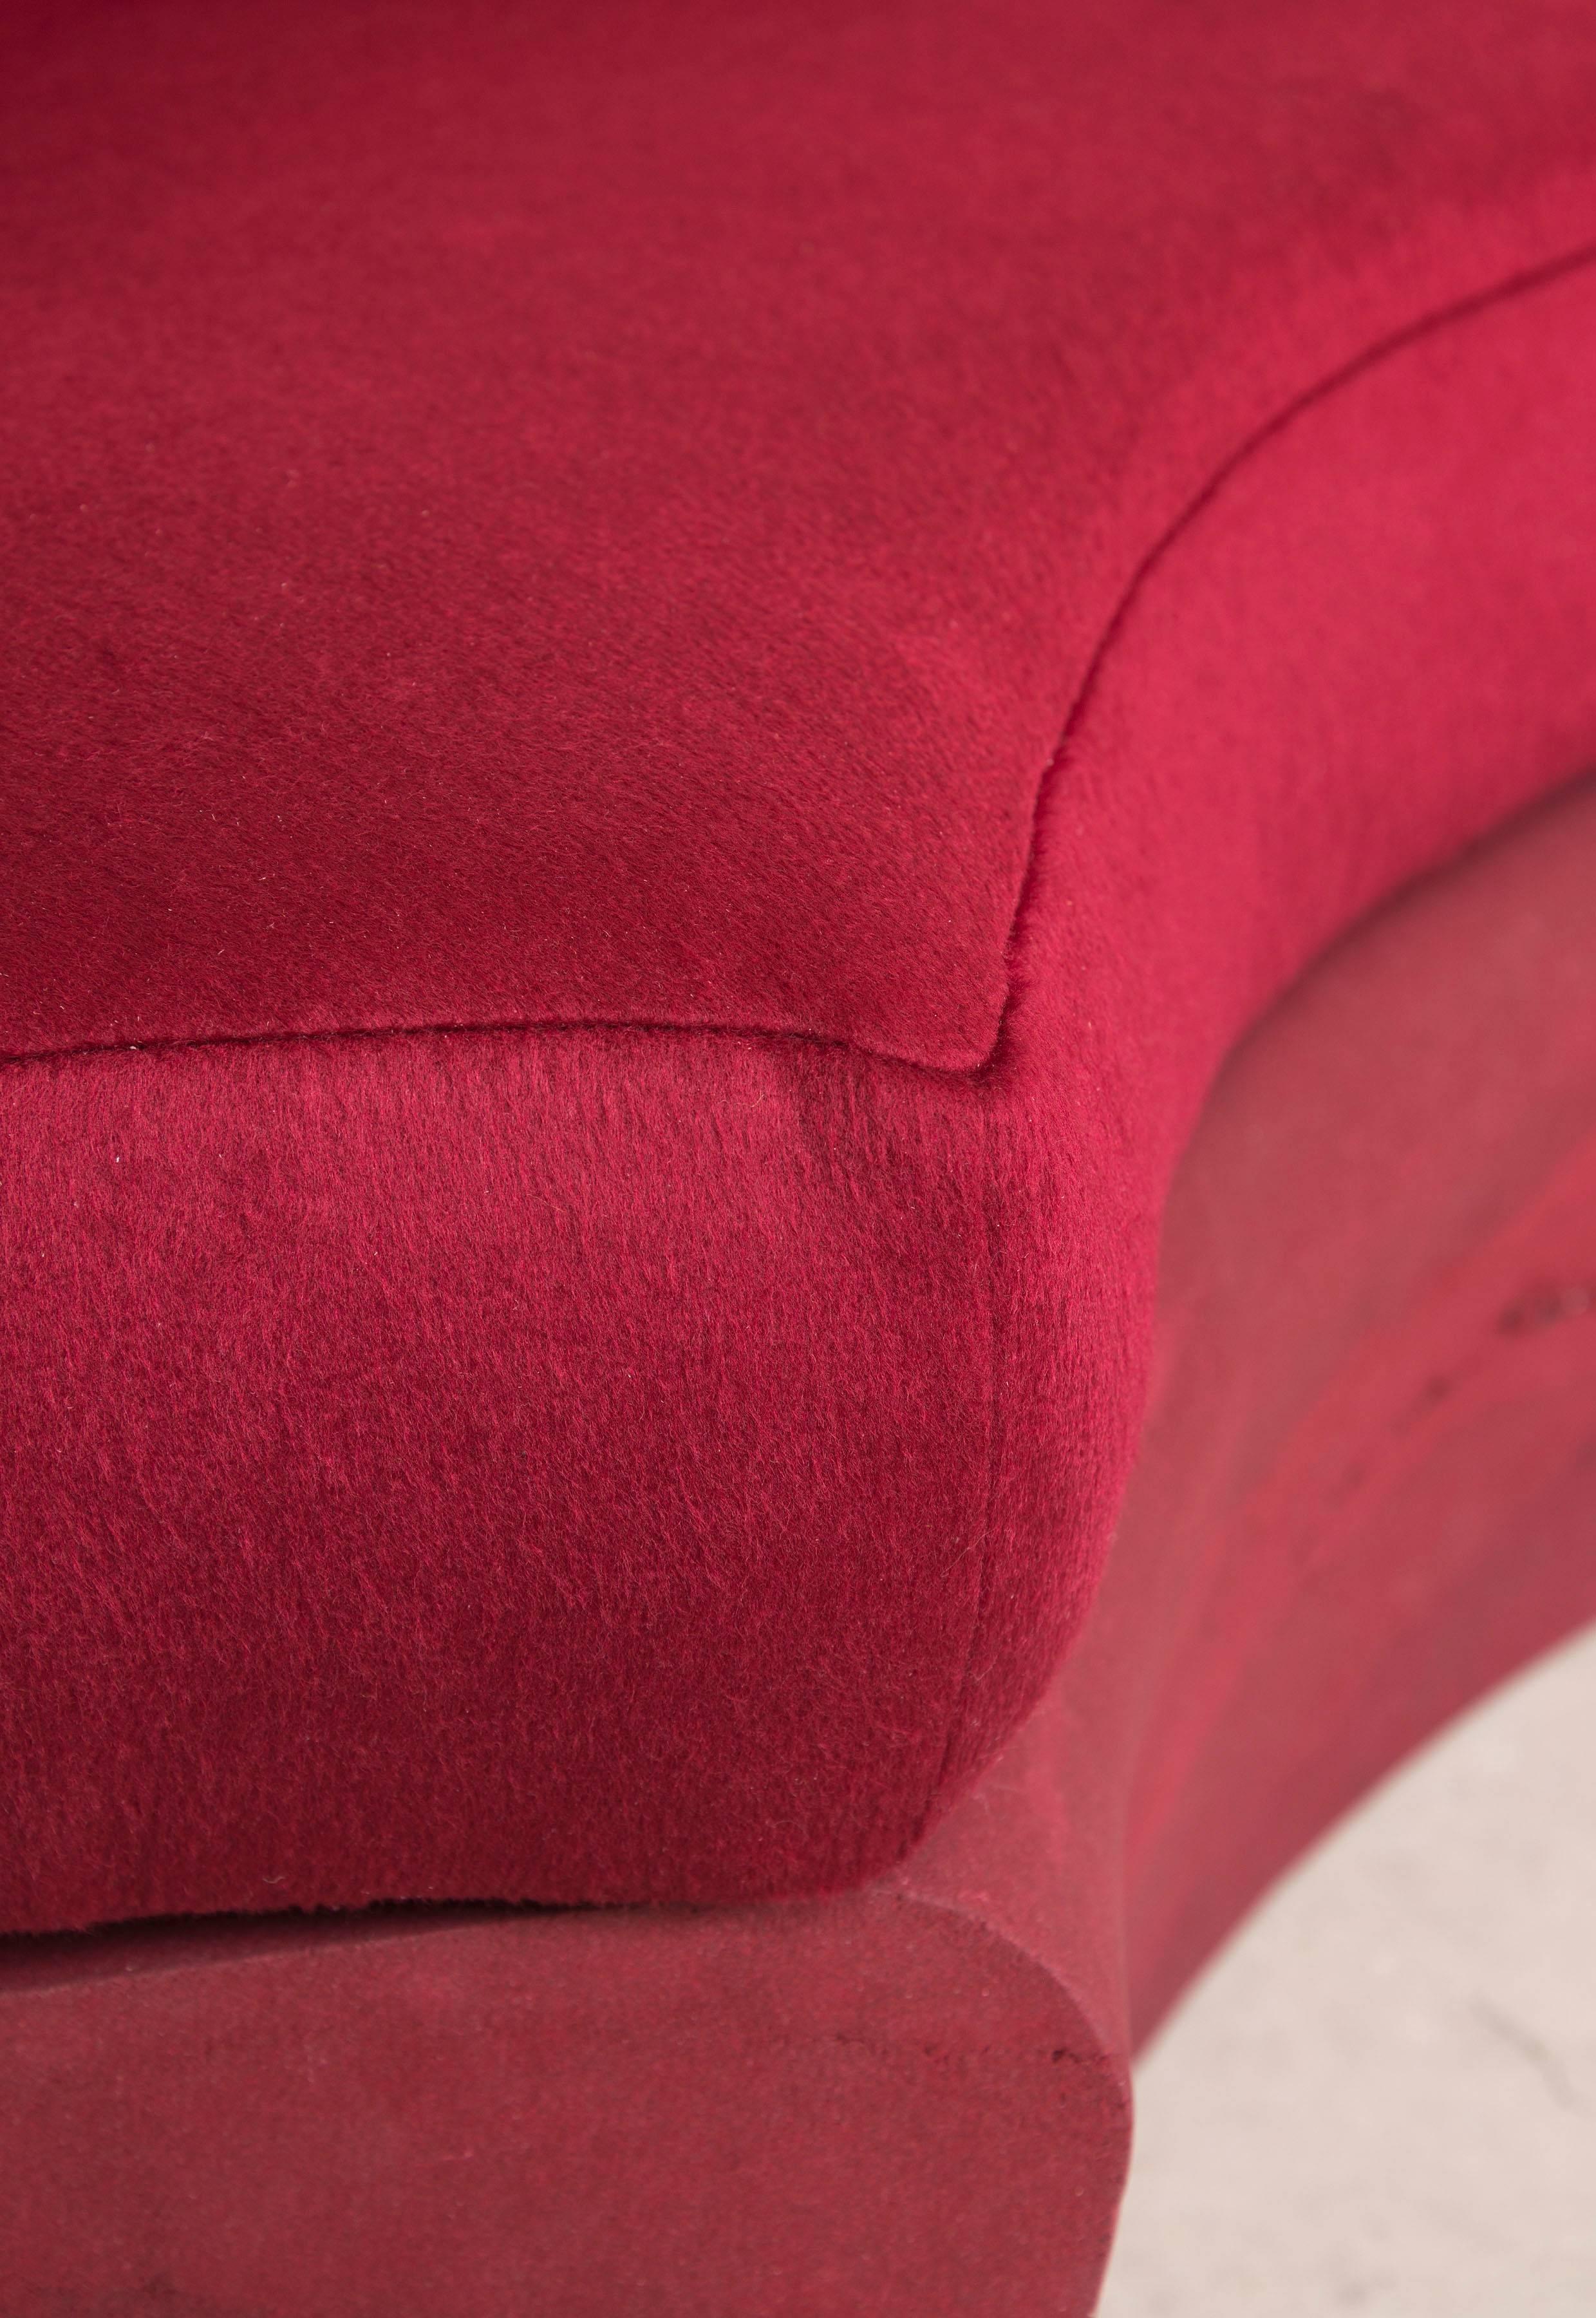 American Dream Sofa, Sand, Crushed Glass and Red Cashmere by Fernando Mastrangelo